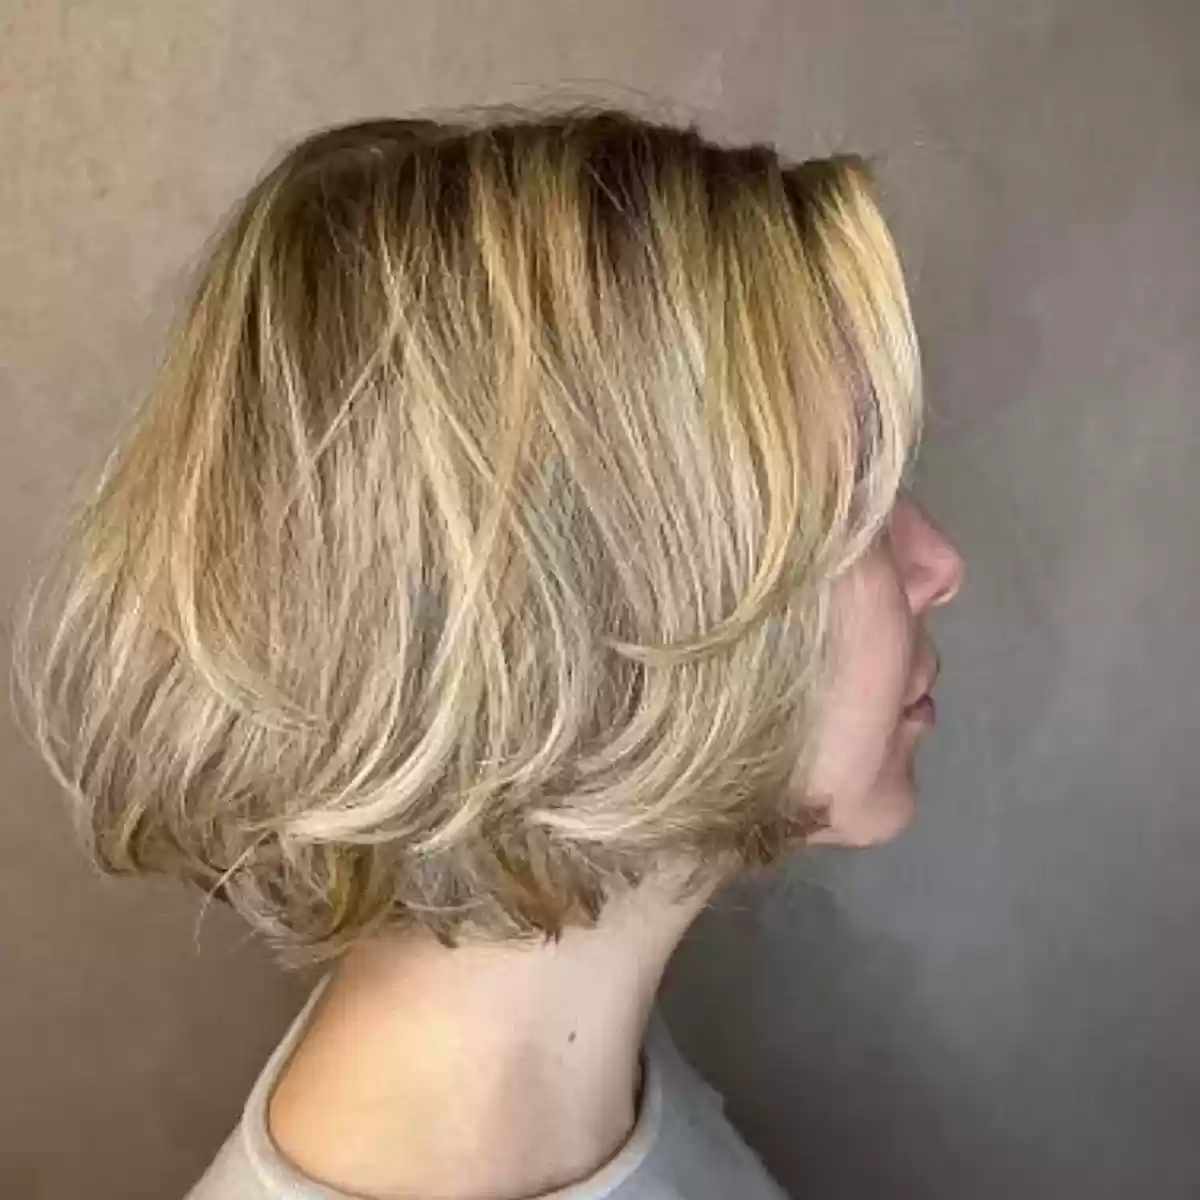 Neck-Length Soft Messy Bob on Rooted Blonde Hair with Fine Layers